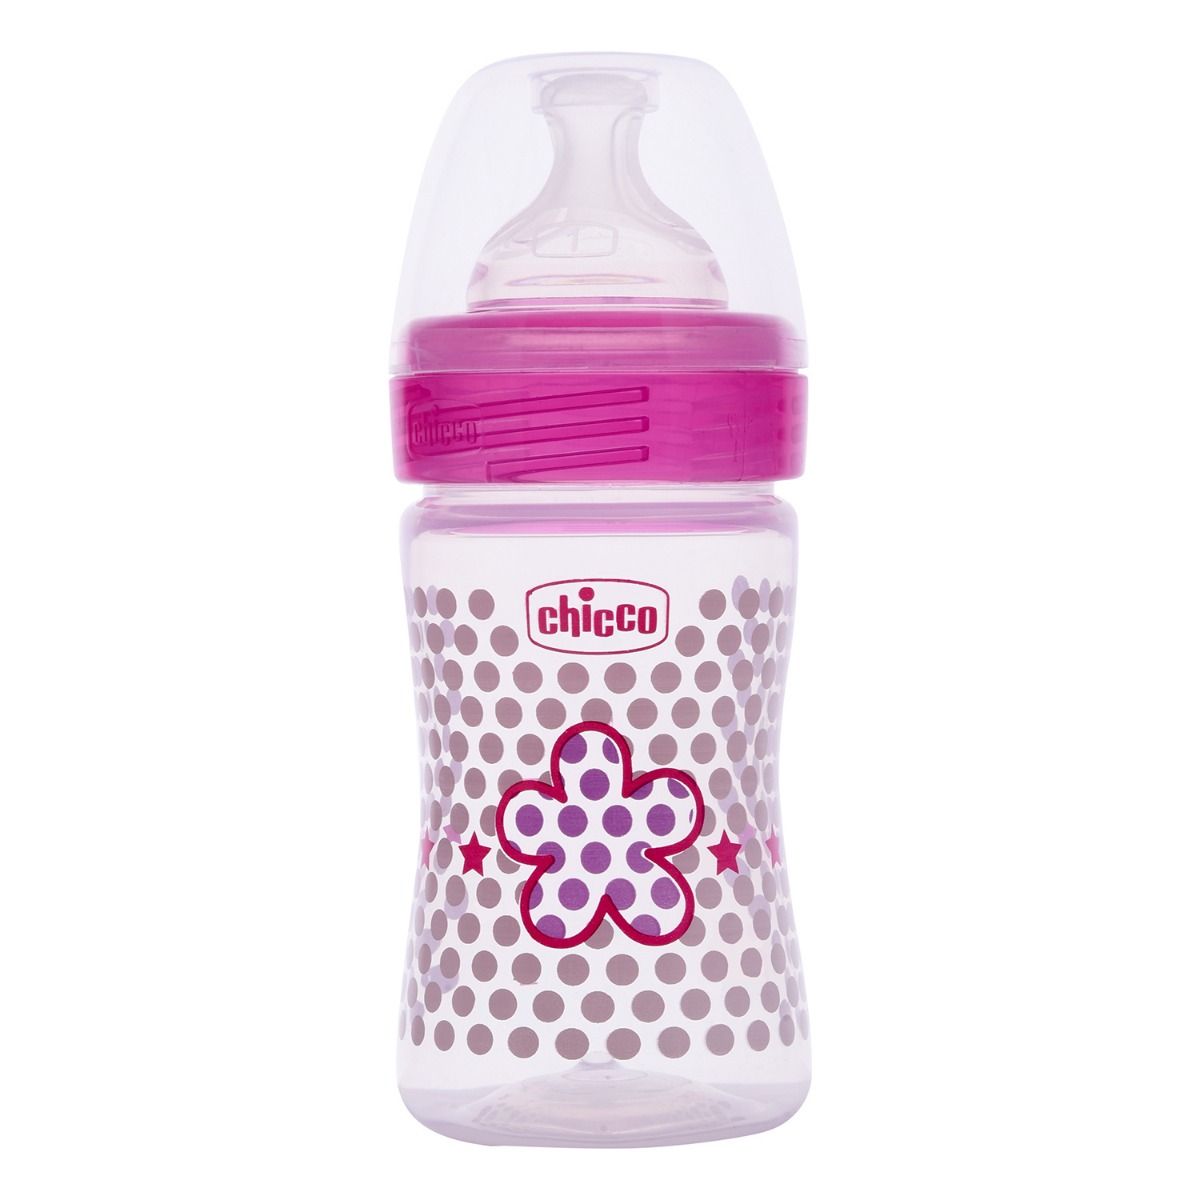 Chicco Well-Being Pink Feeding Bottle, 150 ml, Pack of 1 